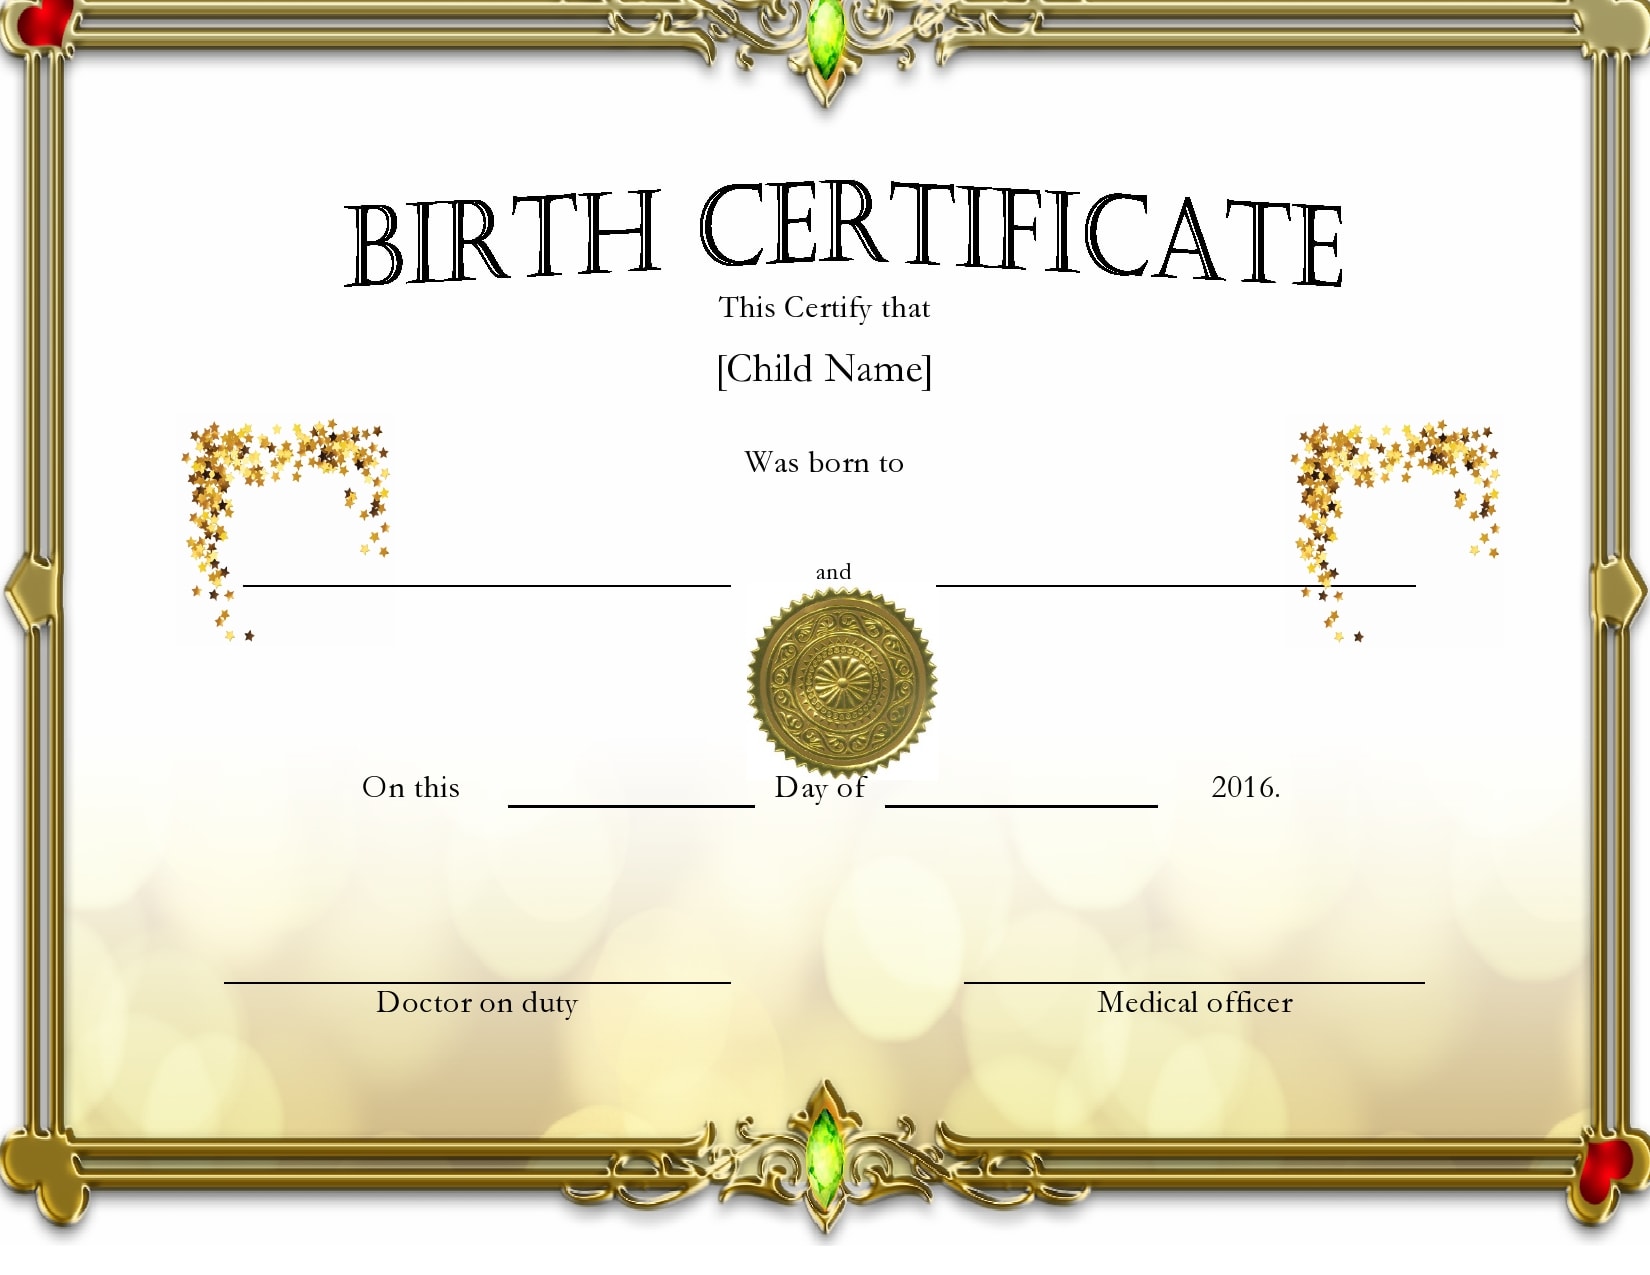 21 Blank Birth Certificate Templates (& Examples) - PrintableTemplates Throughout Free Funny Award Certificate Templates For Word